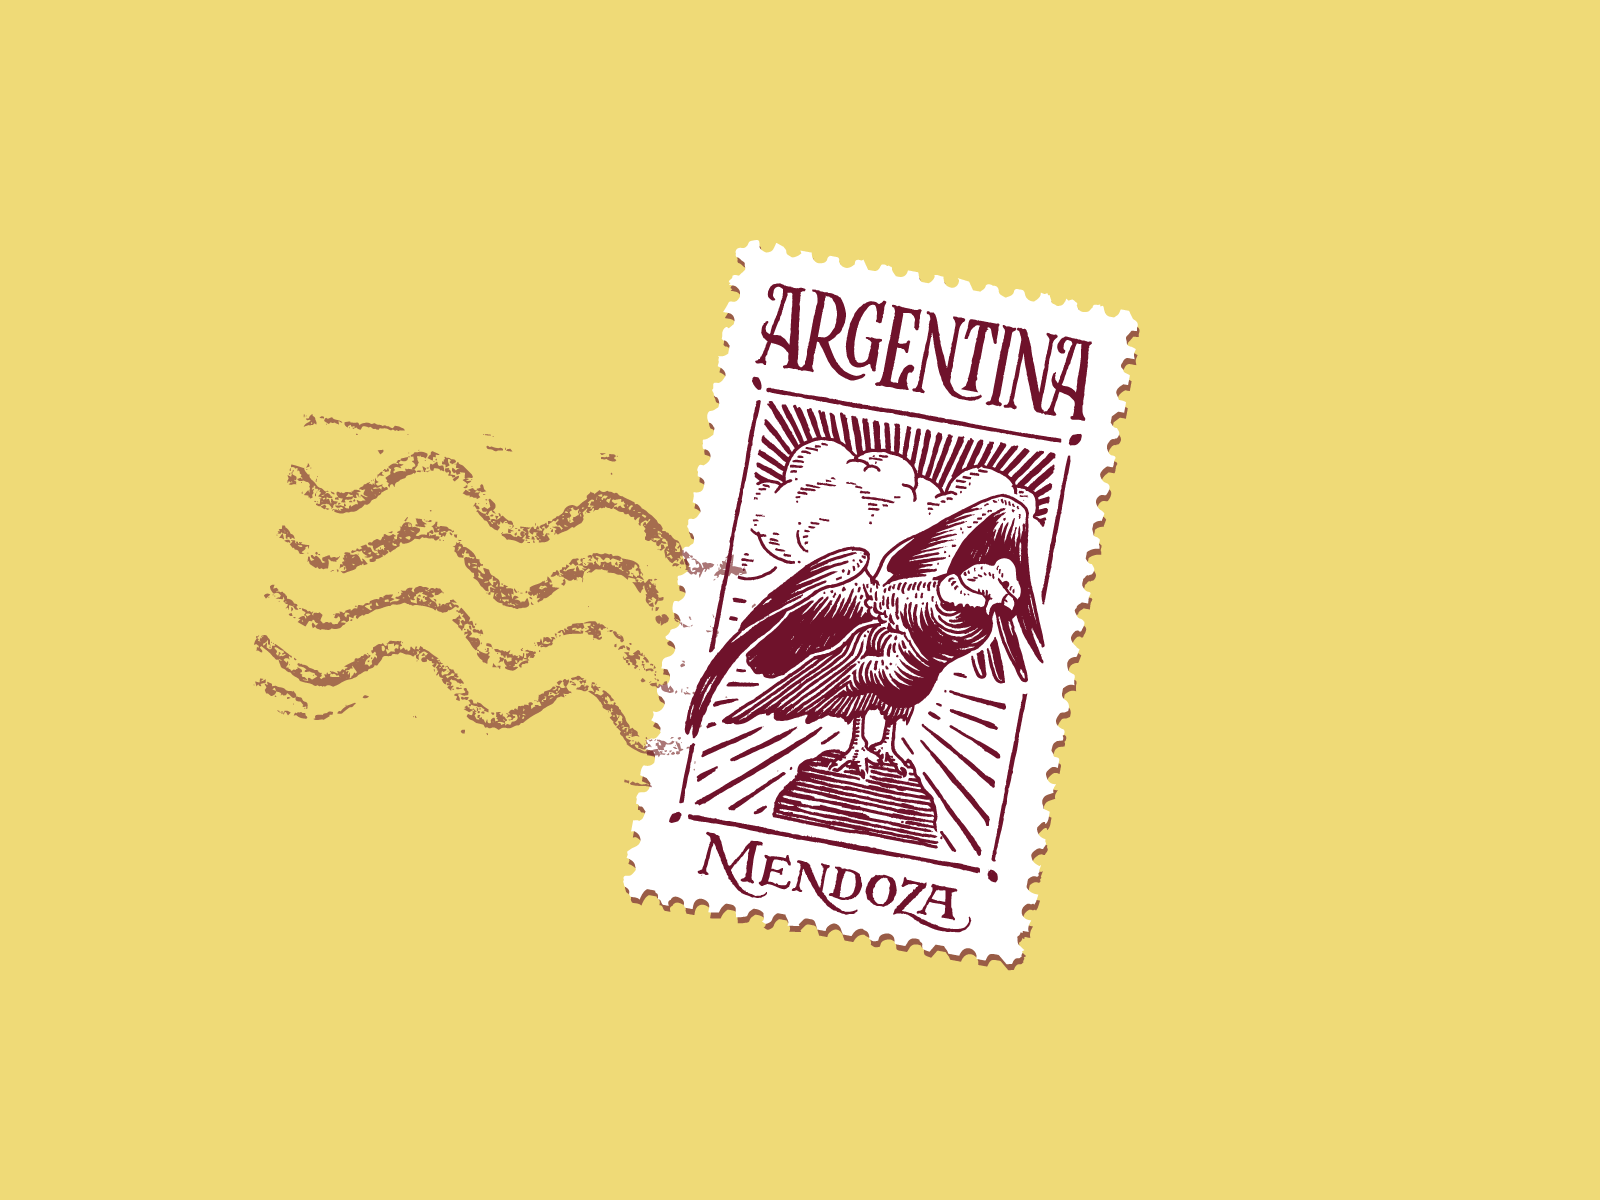 We are live on Dribbble now, from Mendoza Argentina! engrave illustration lettering